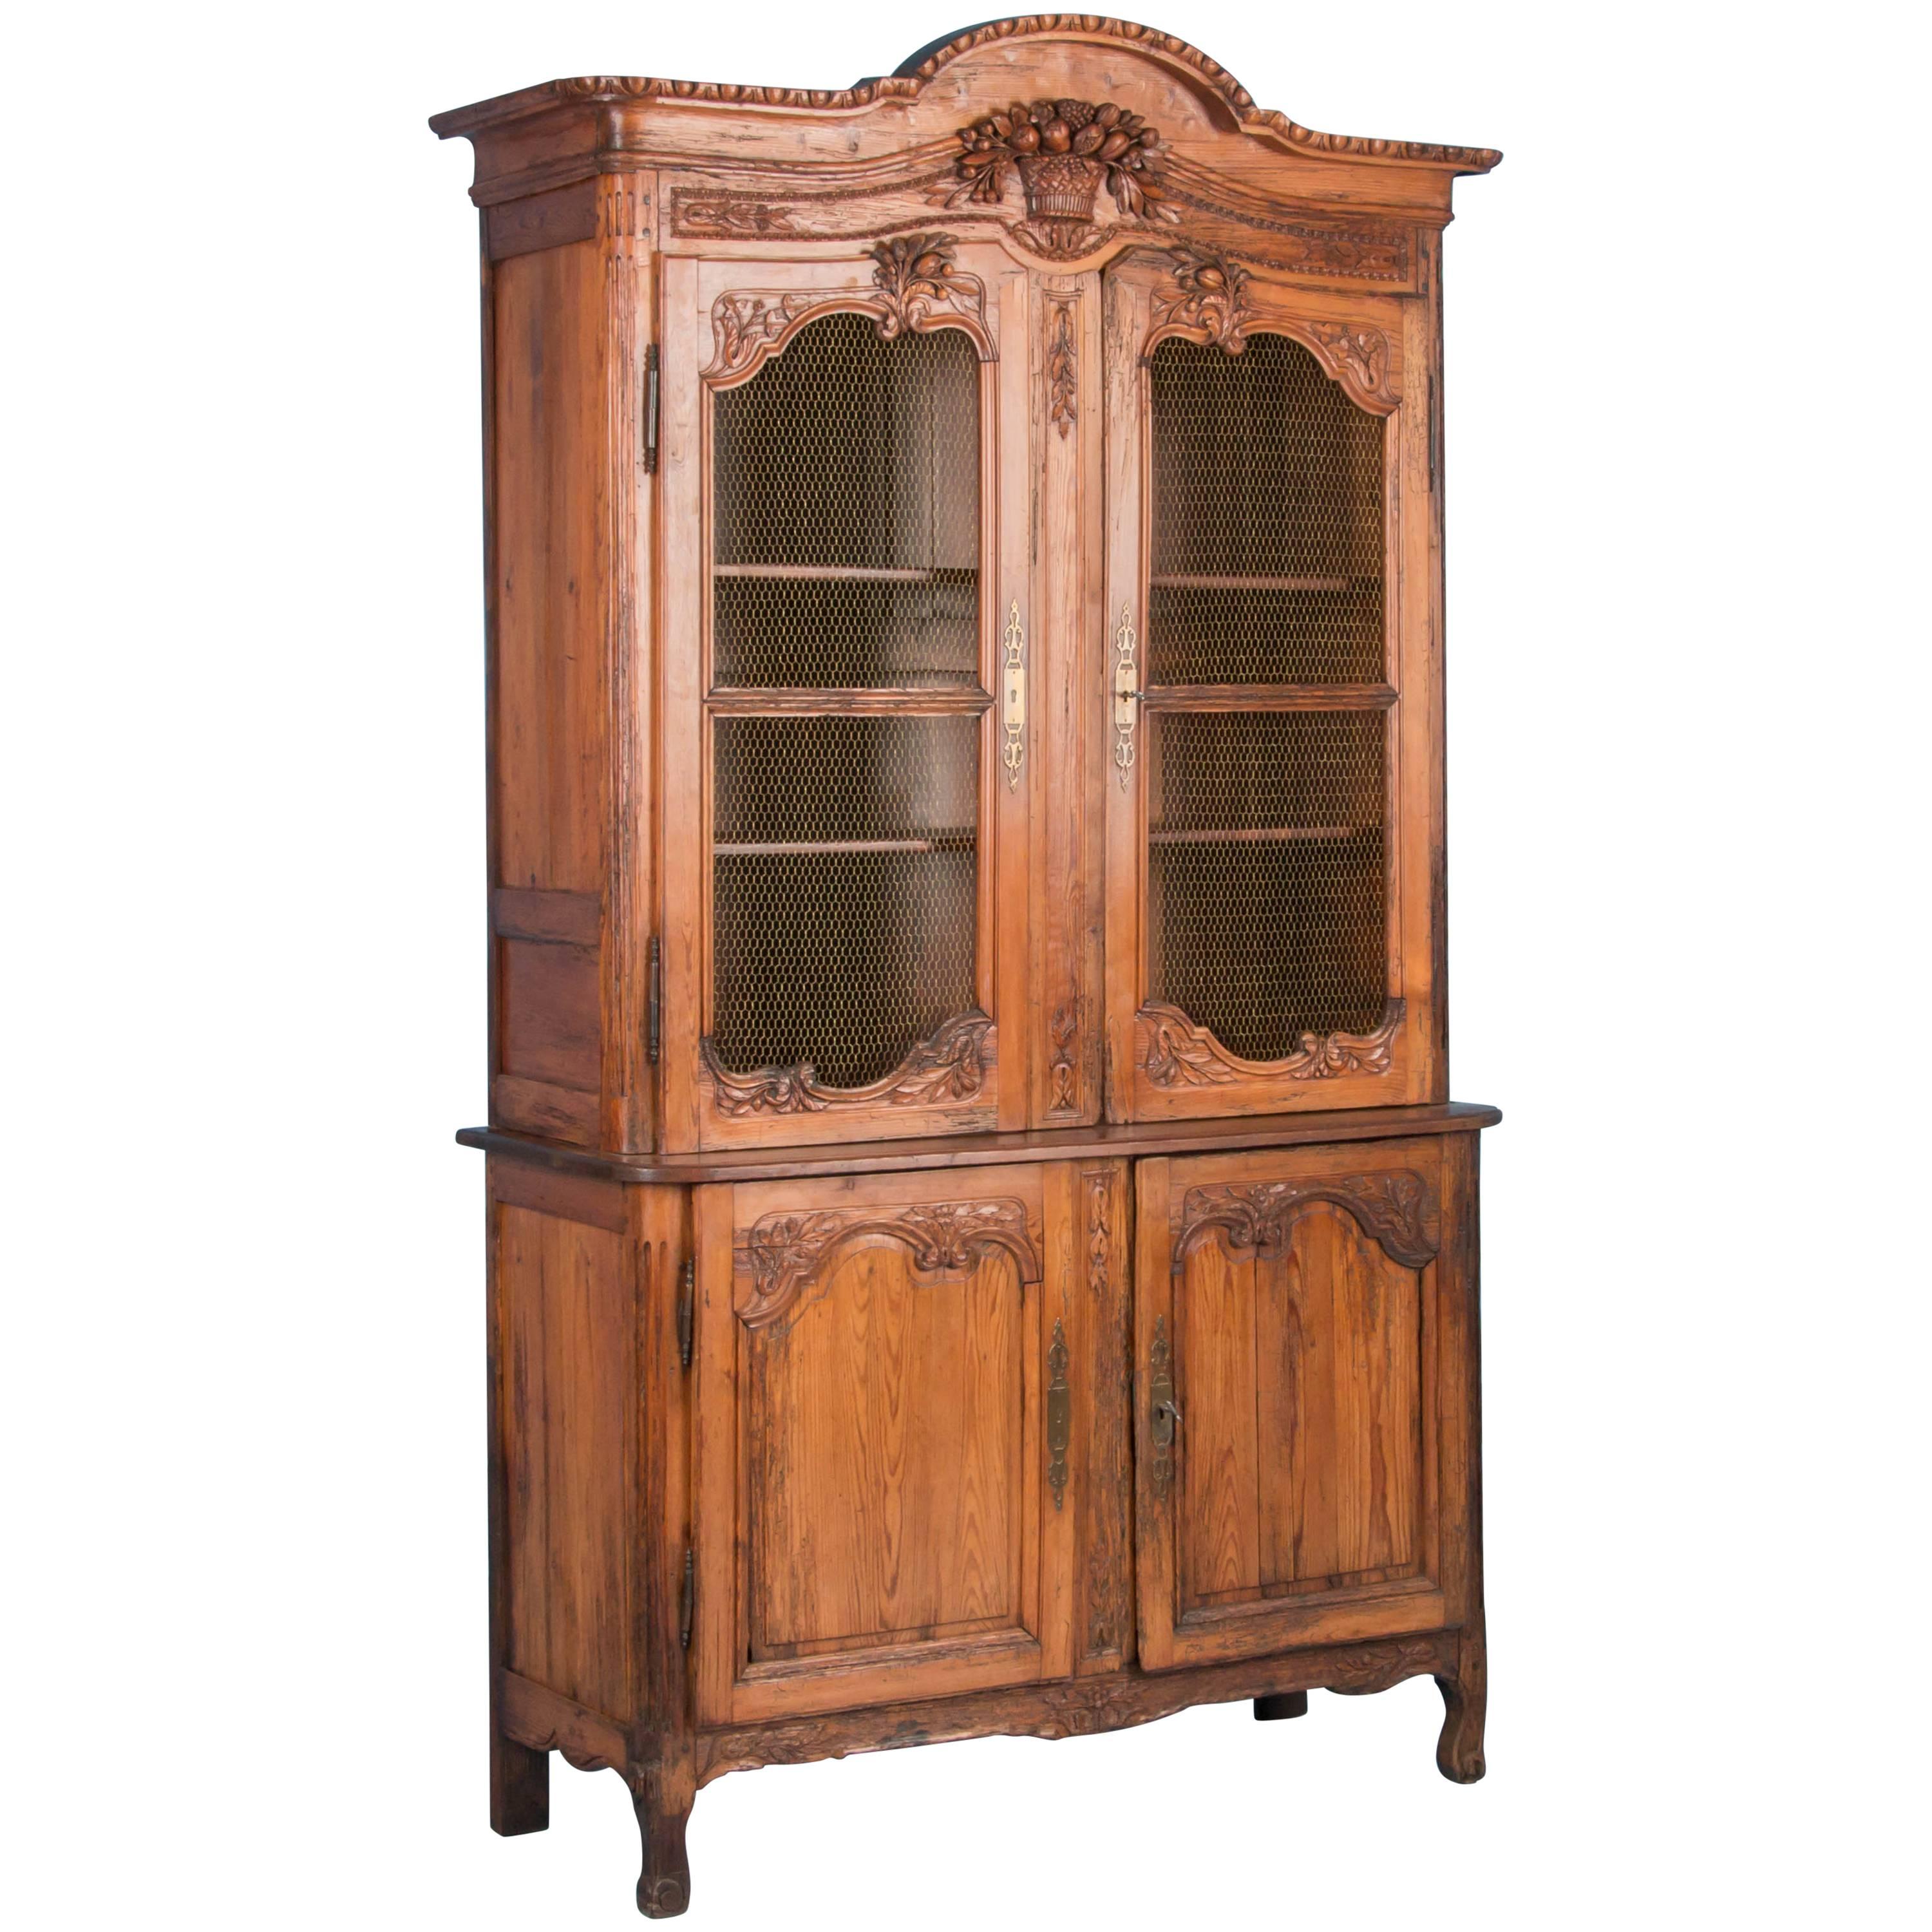 Antique 19th Century Hand-Carved French Provincial Bookcase Cabinet